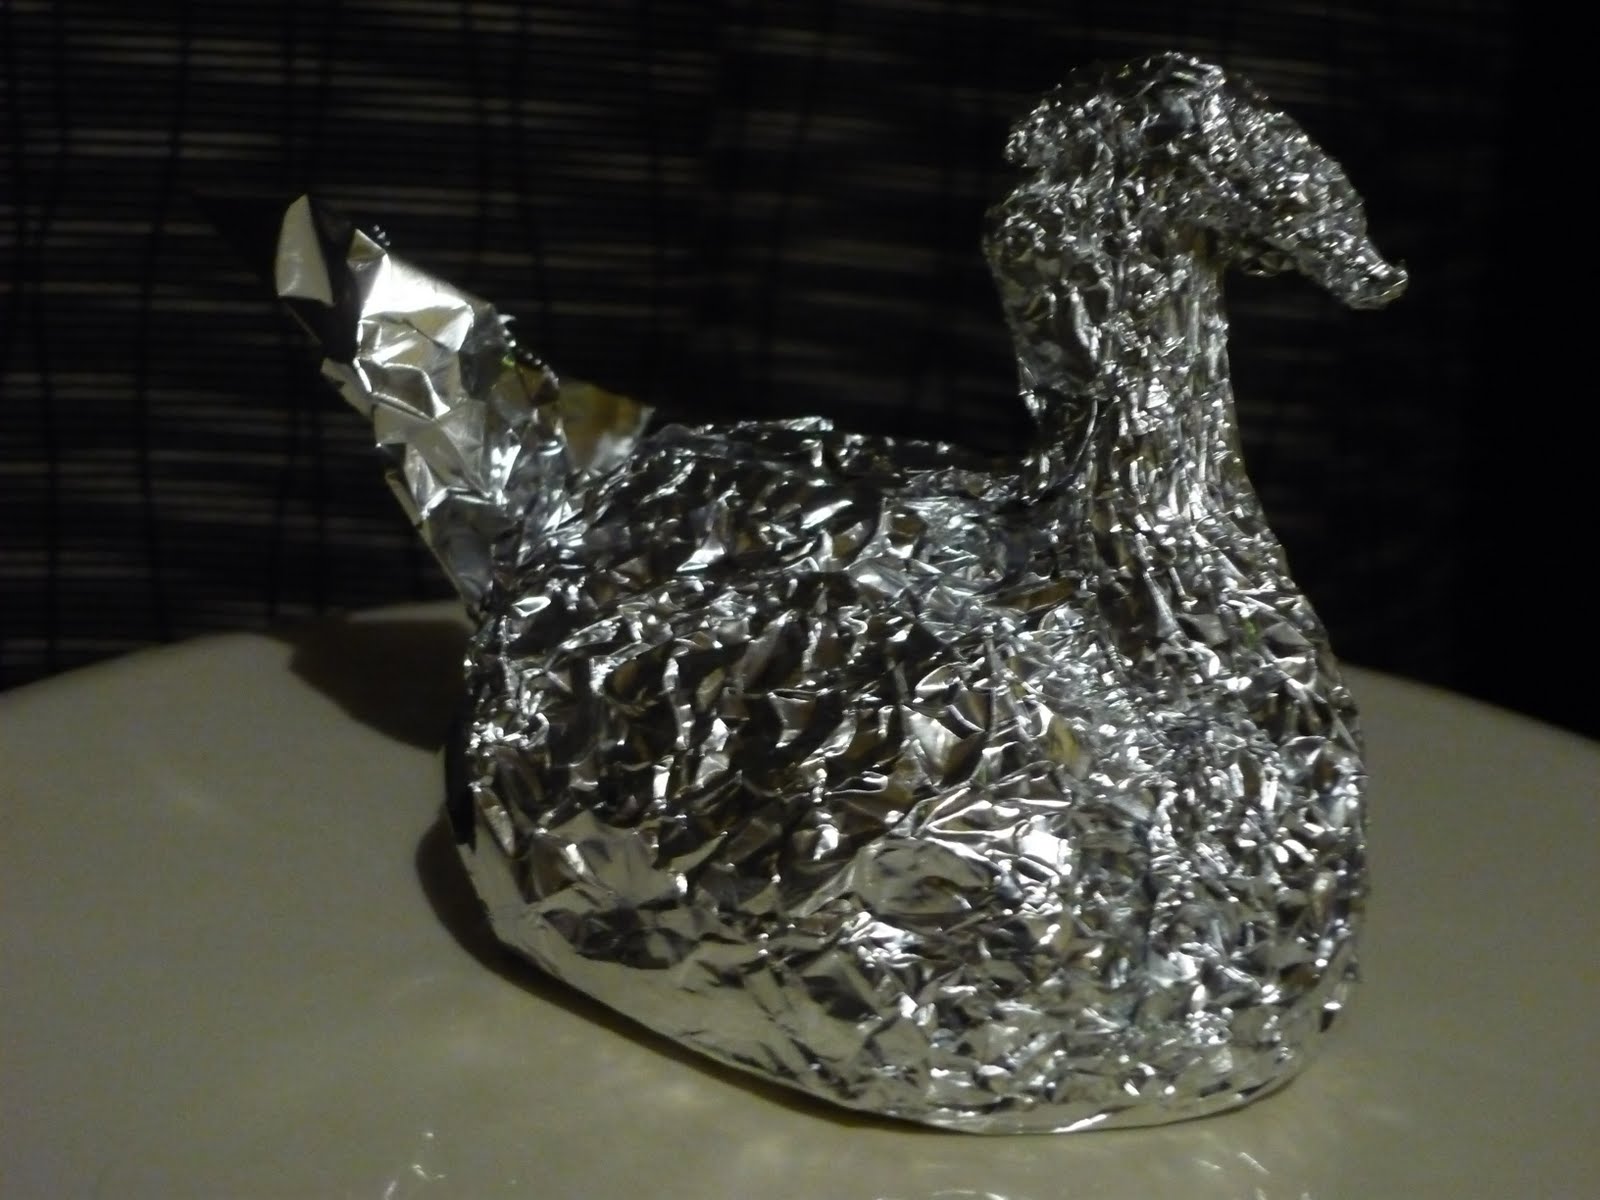 That's So Retro! How To Make A Foil Swan for Left Over Food